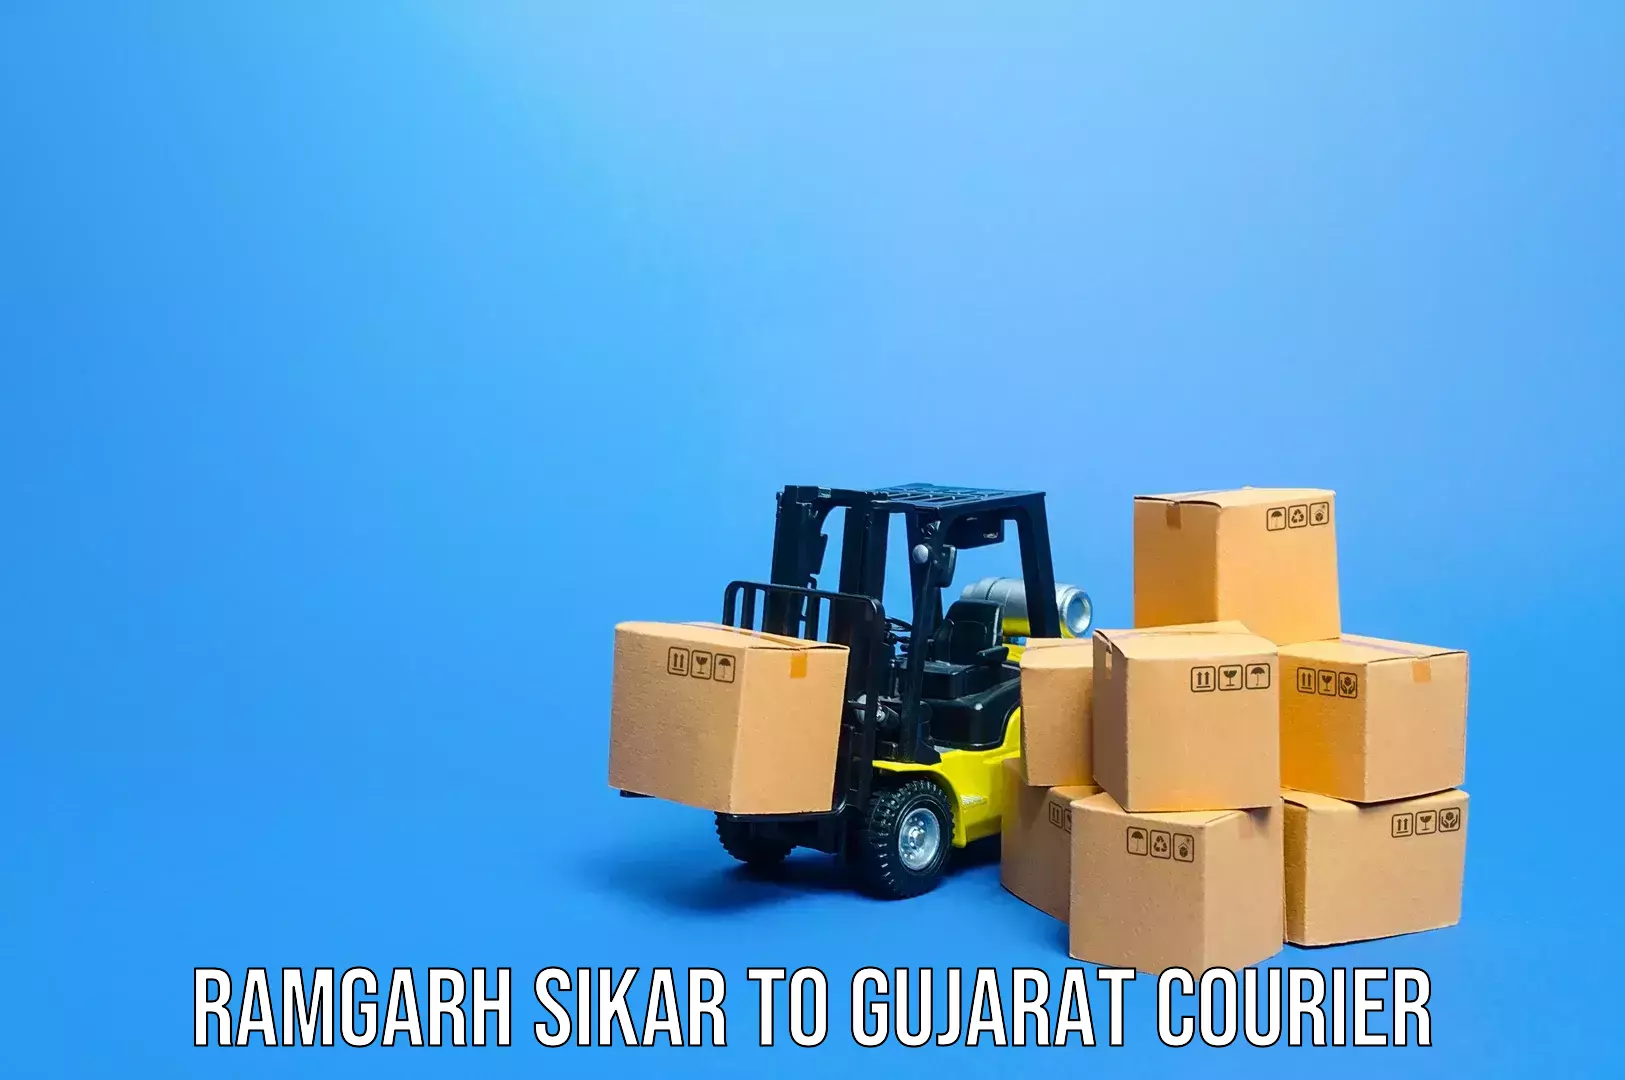 Luggage delivery providers Ramgarh Sikar to IIIT Surat